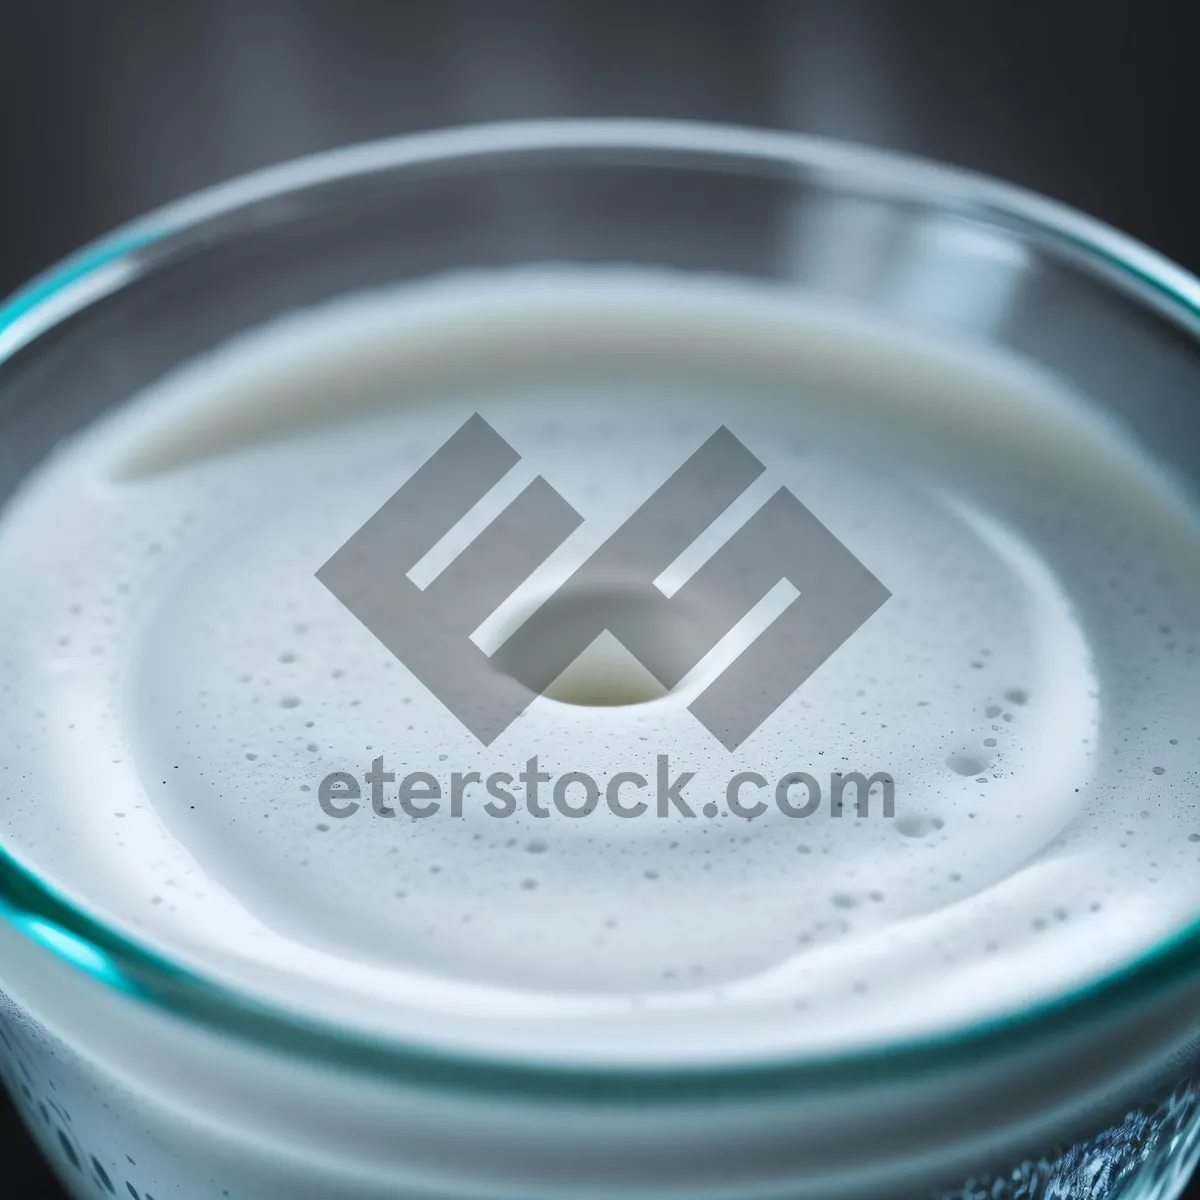 Picture of Refreshing Liquid Ripples in Clean Container